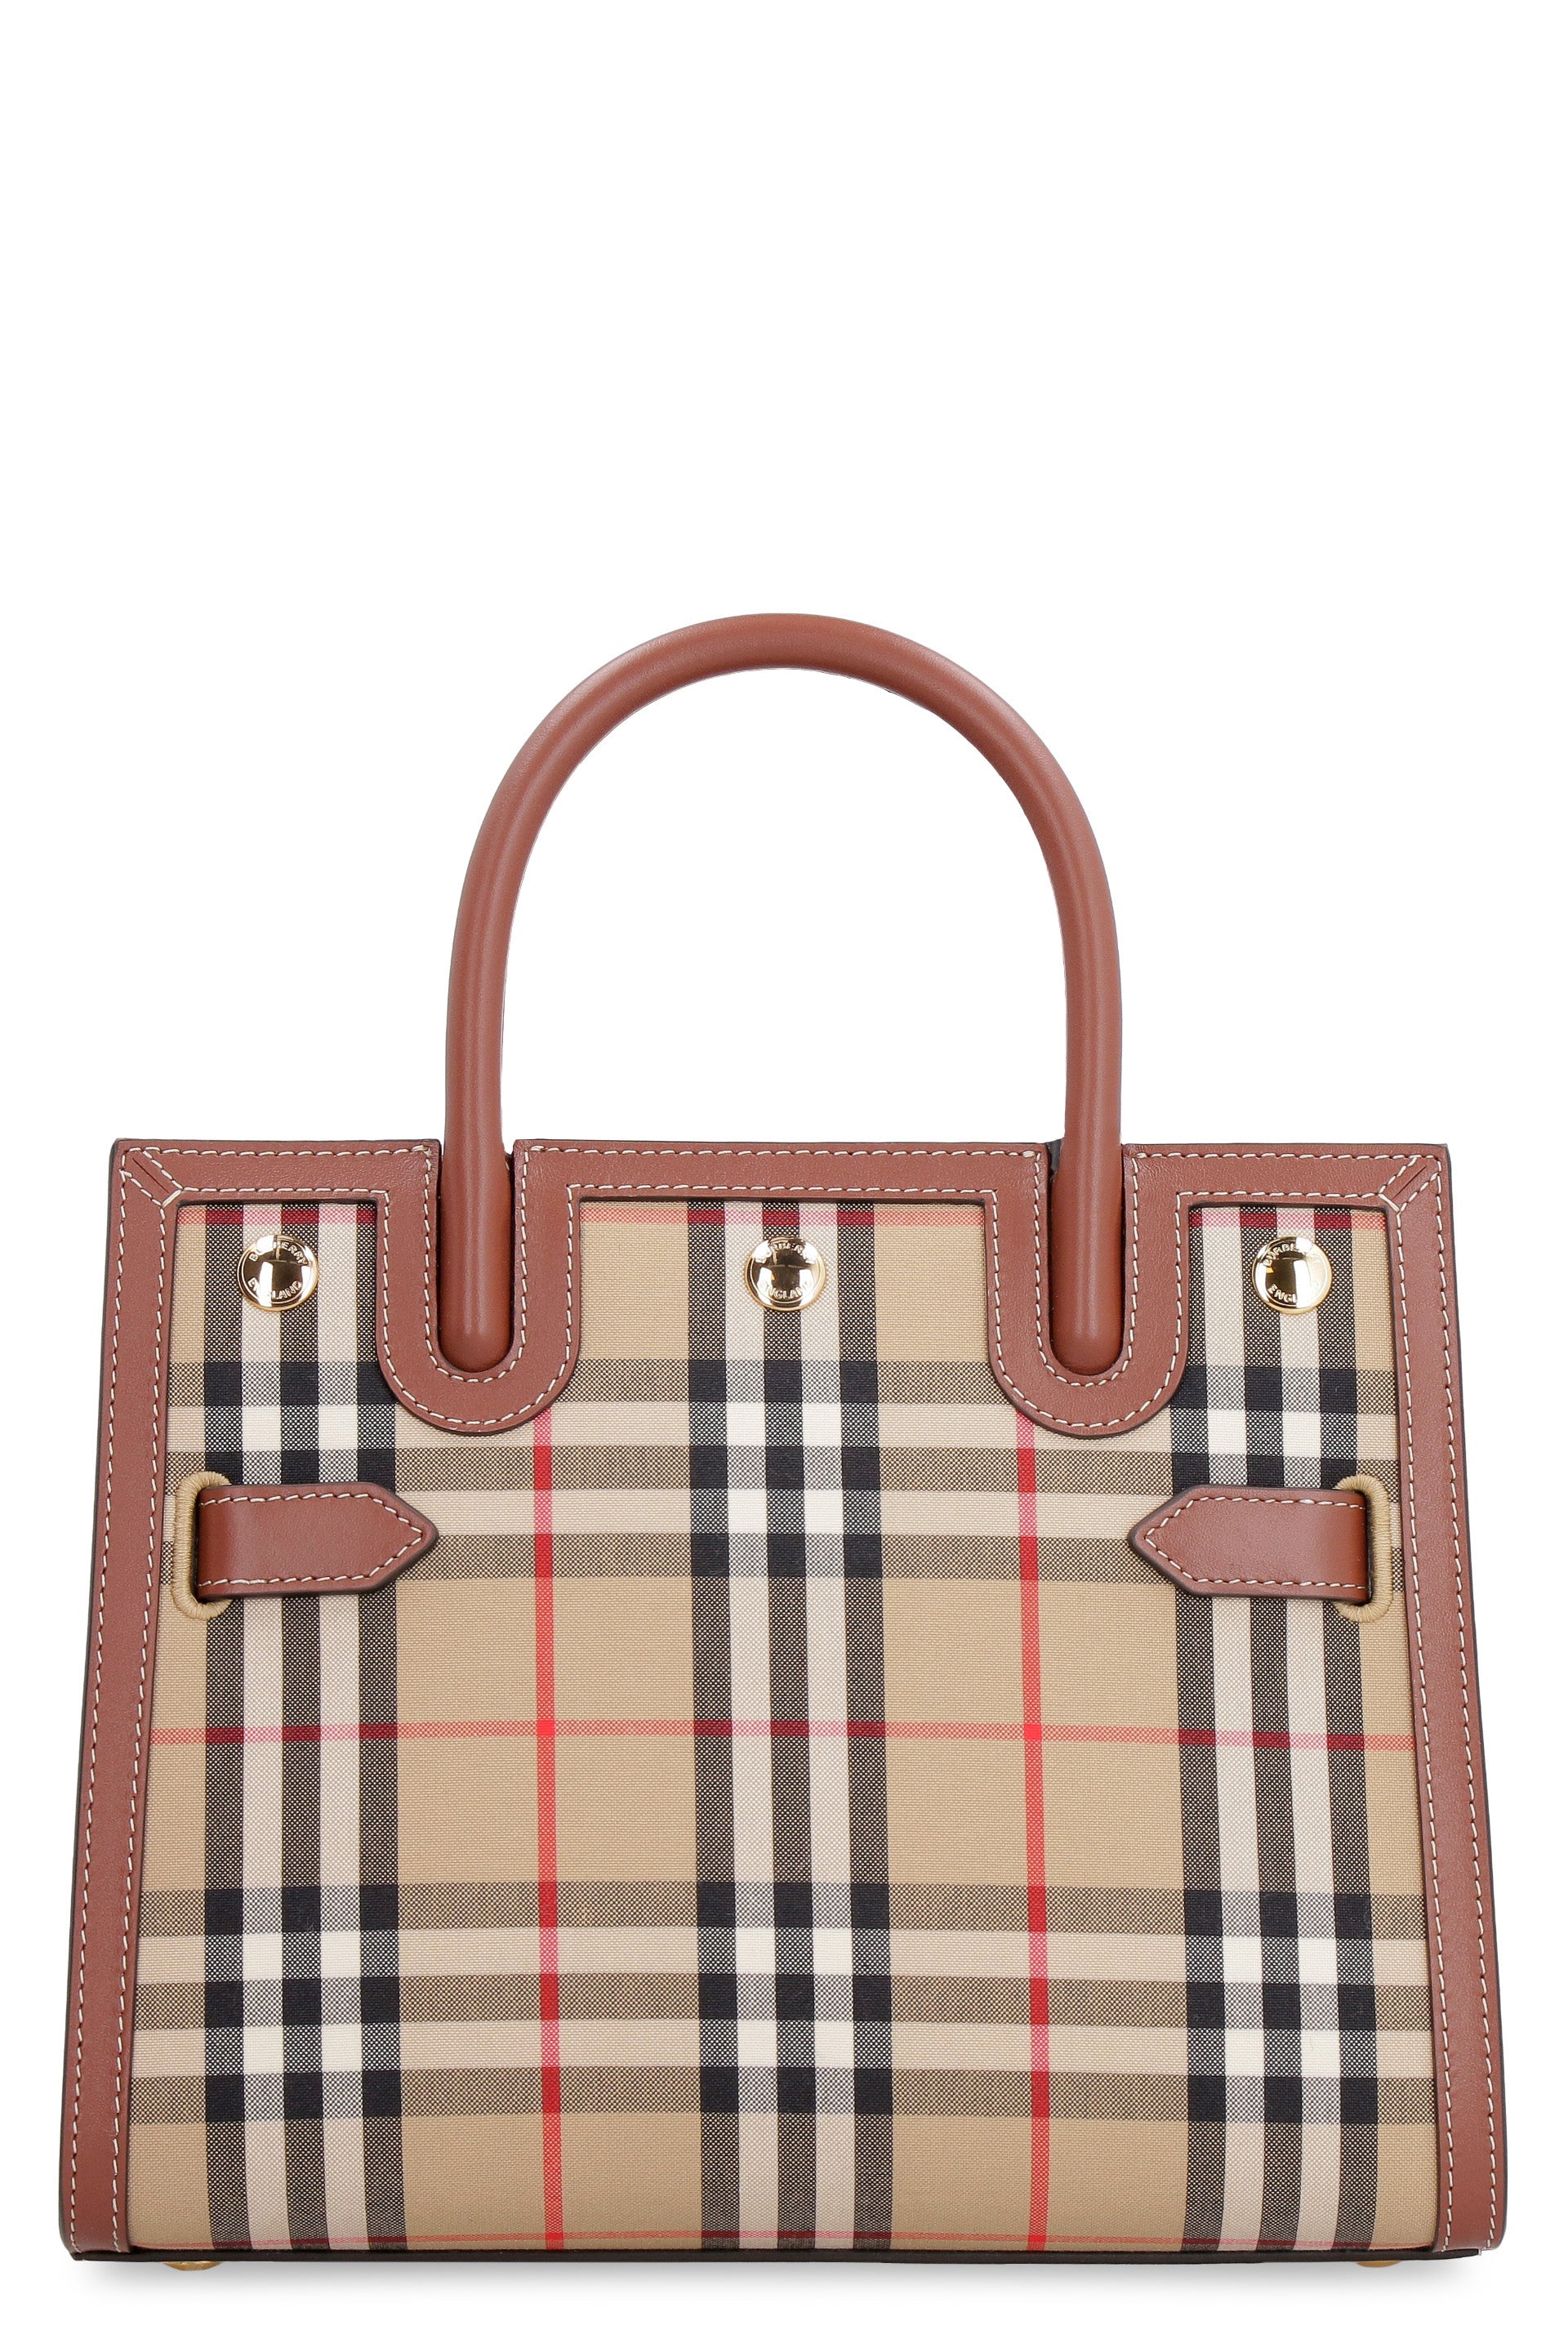 BURBERRY: Title bag in leather and Vintage Check print fabric - Beige